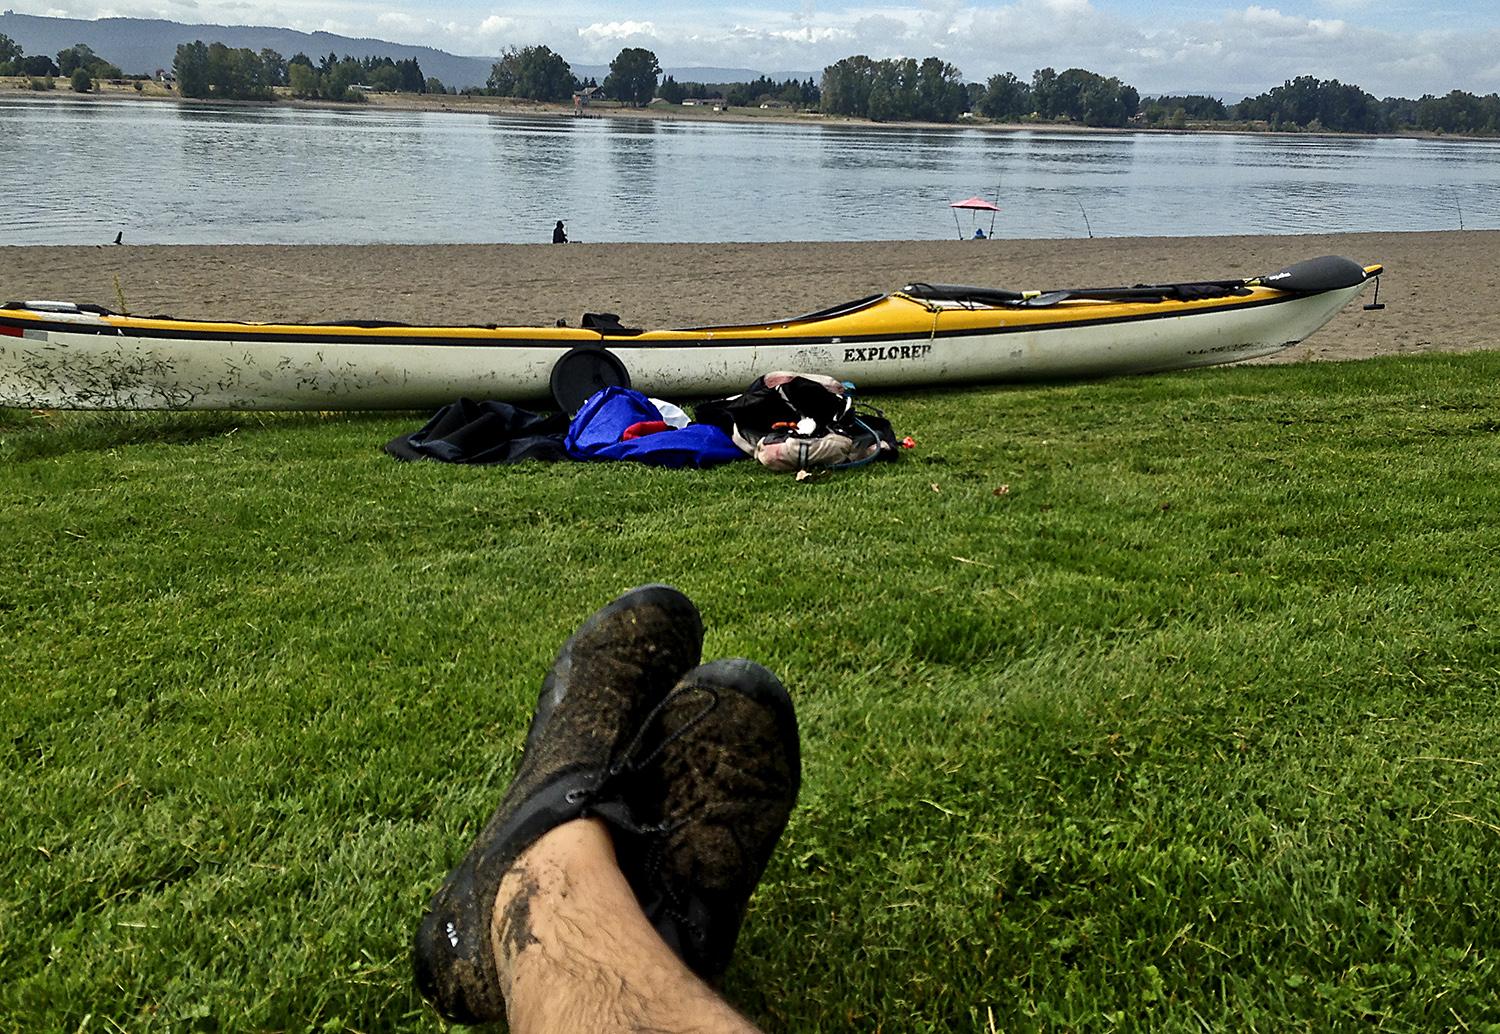 the author's ankles and feet, crossed, resting on the grassy shore looking at the kayak, sandy beach, and river